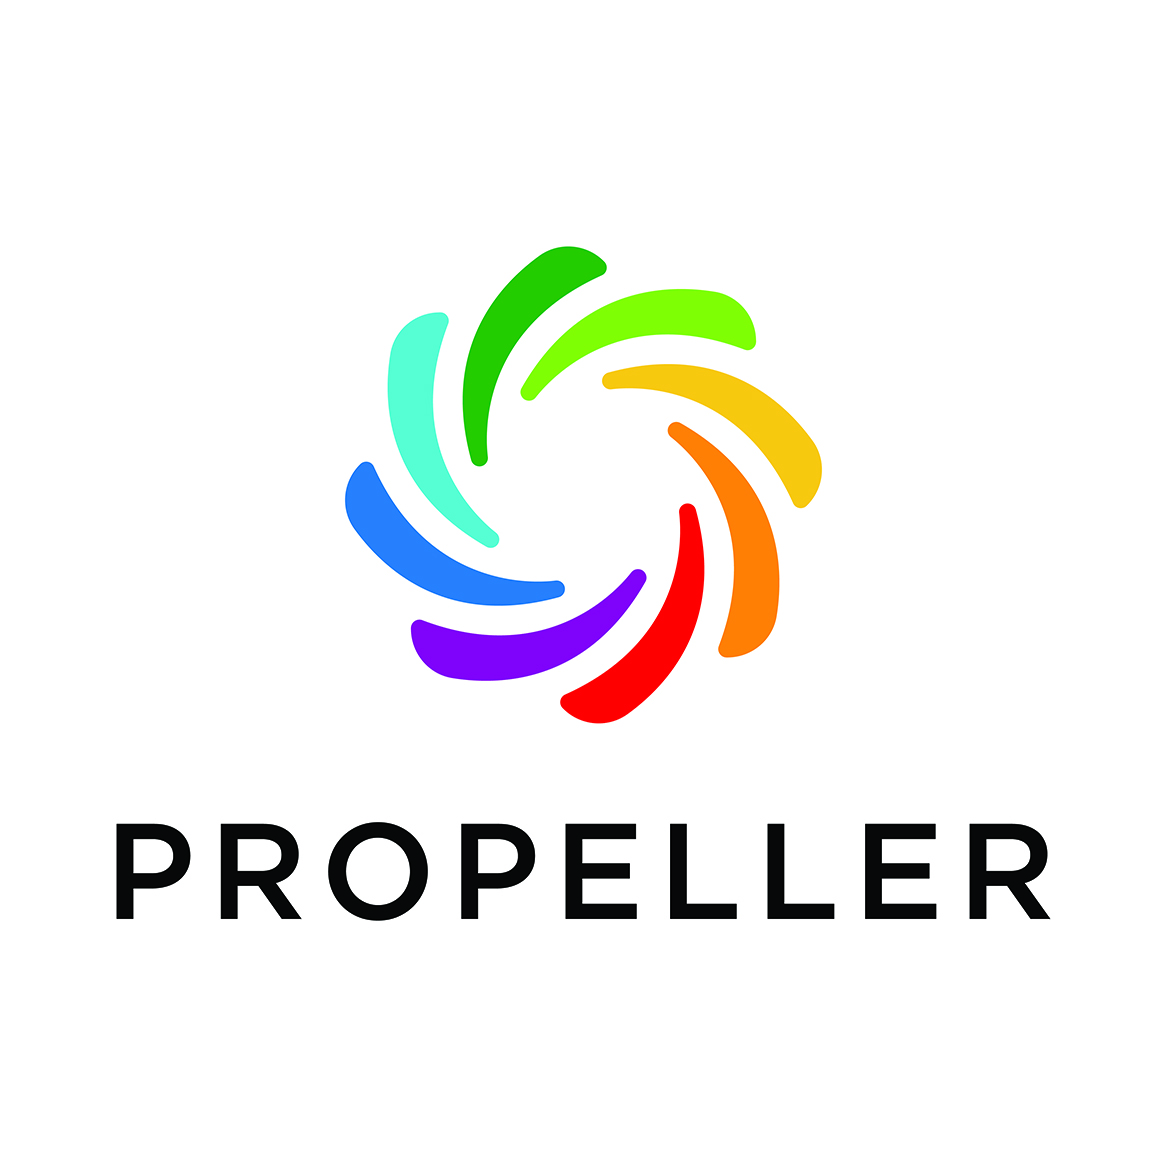 Propeller in black lettering with rainbow colored swirl logo above